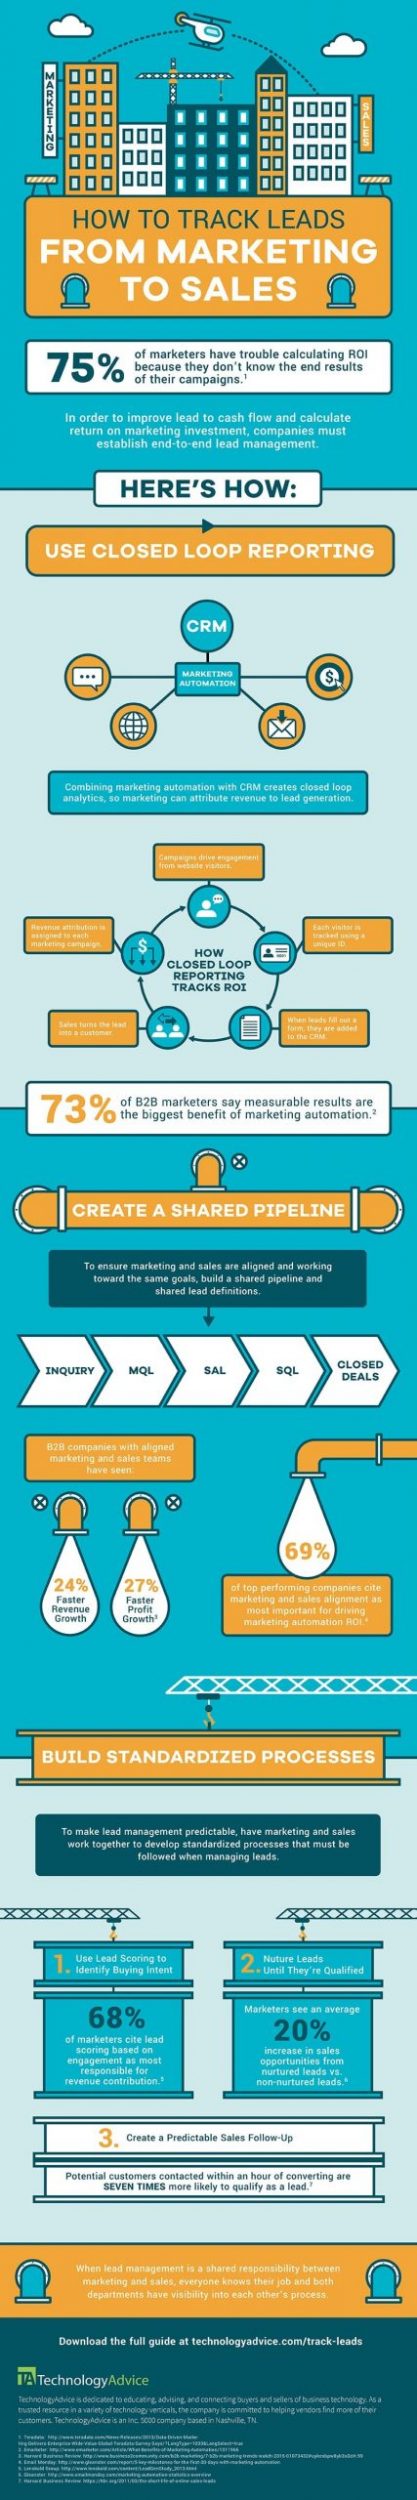 infographic showing how to track leads from marketing to sales, Dentons Digital, Website Design Build, Wiltshire, Somerset